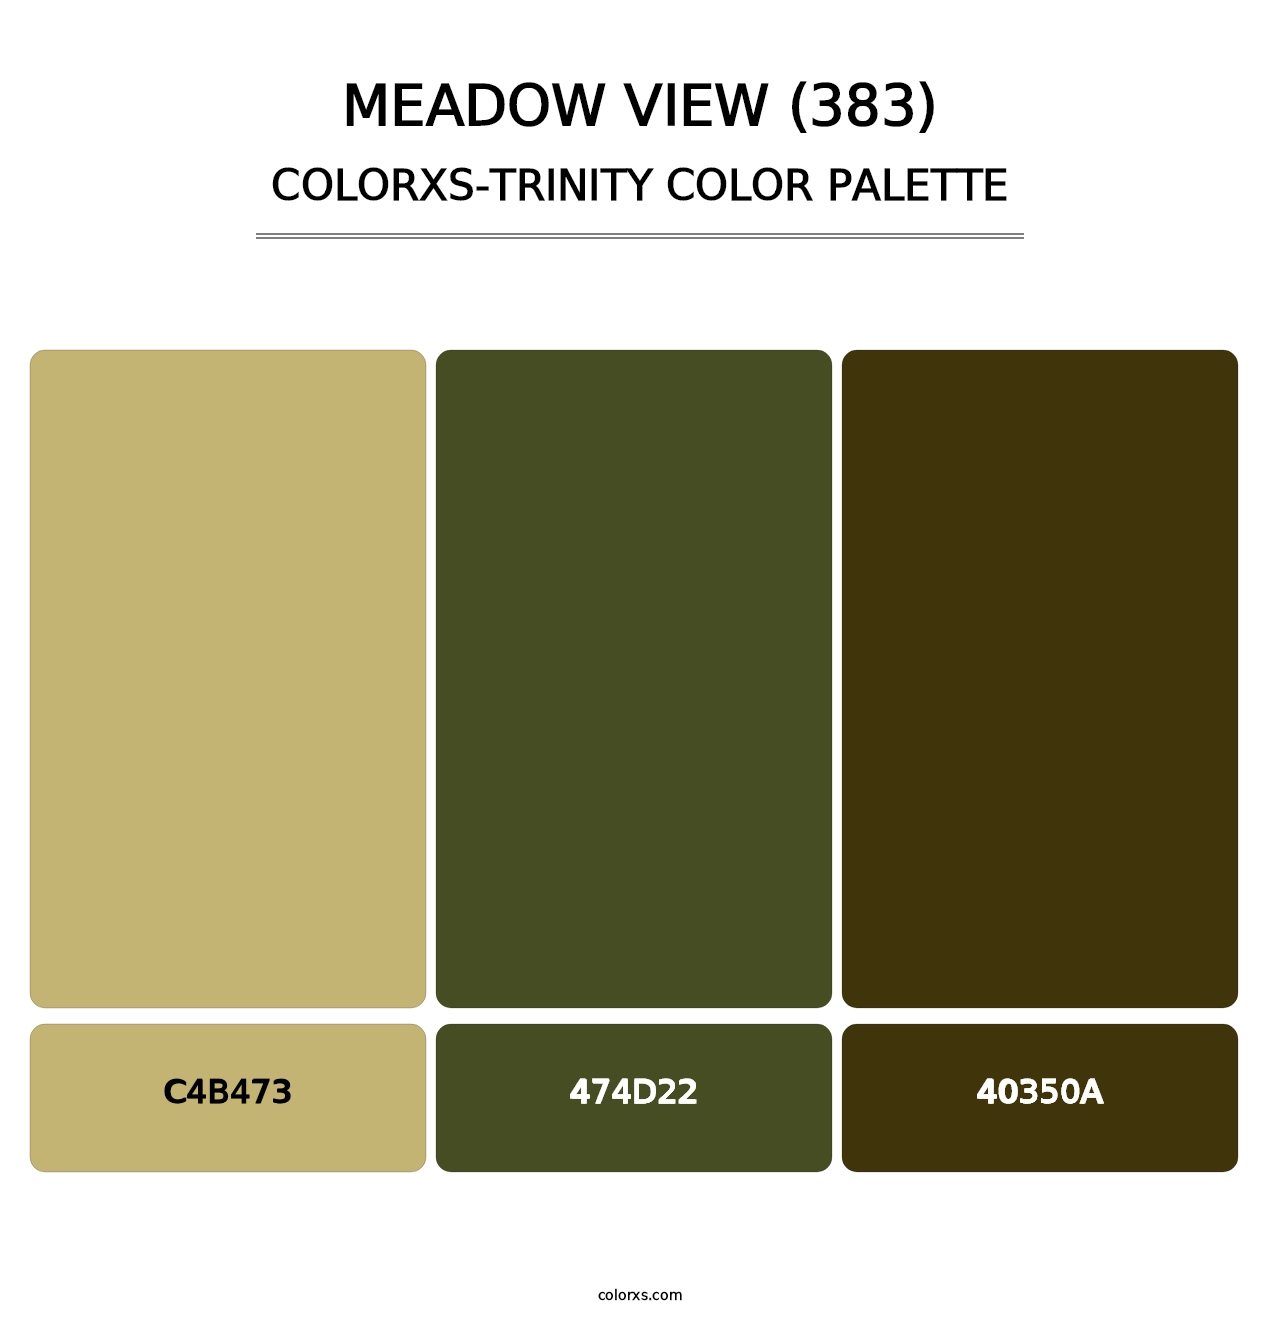 Meadow View (383) - Colorxs Trinity Palette